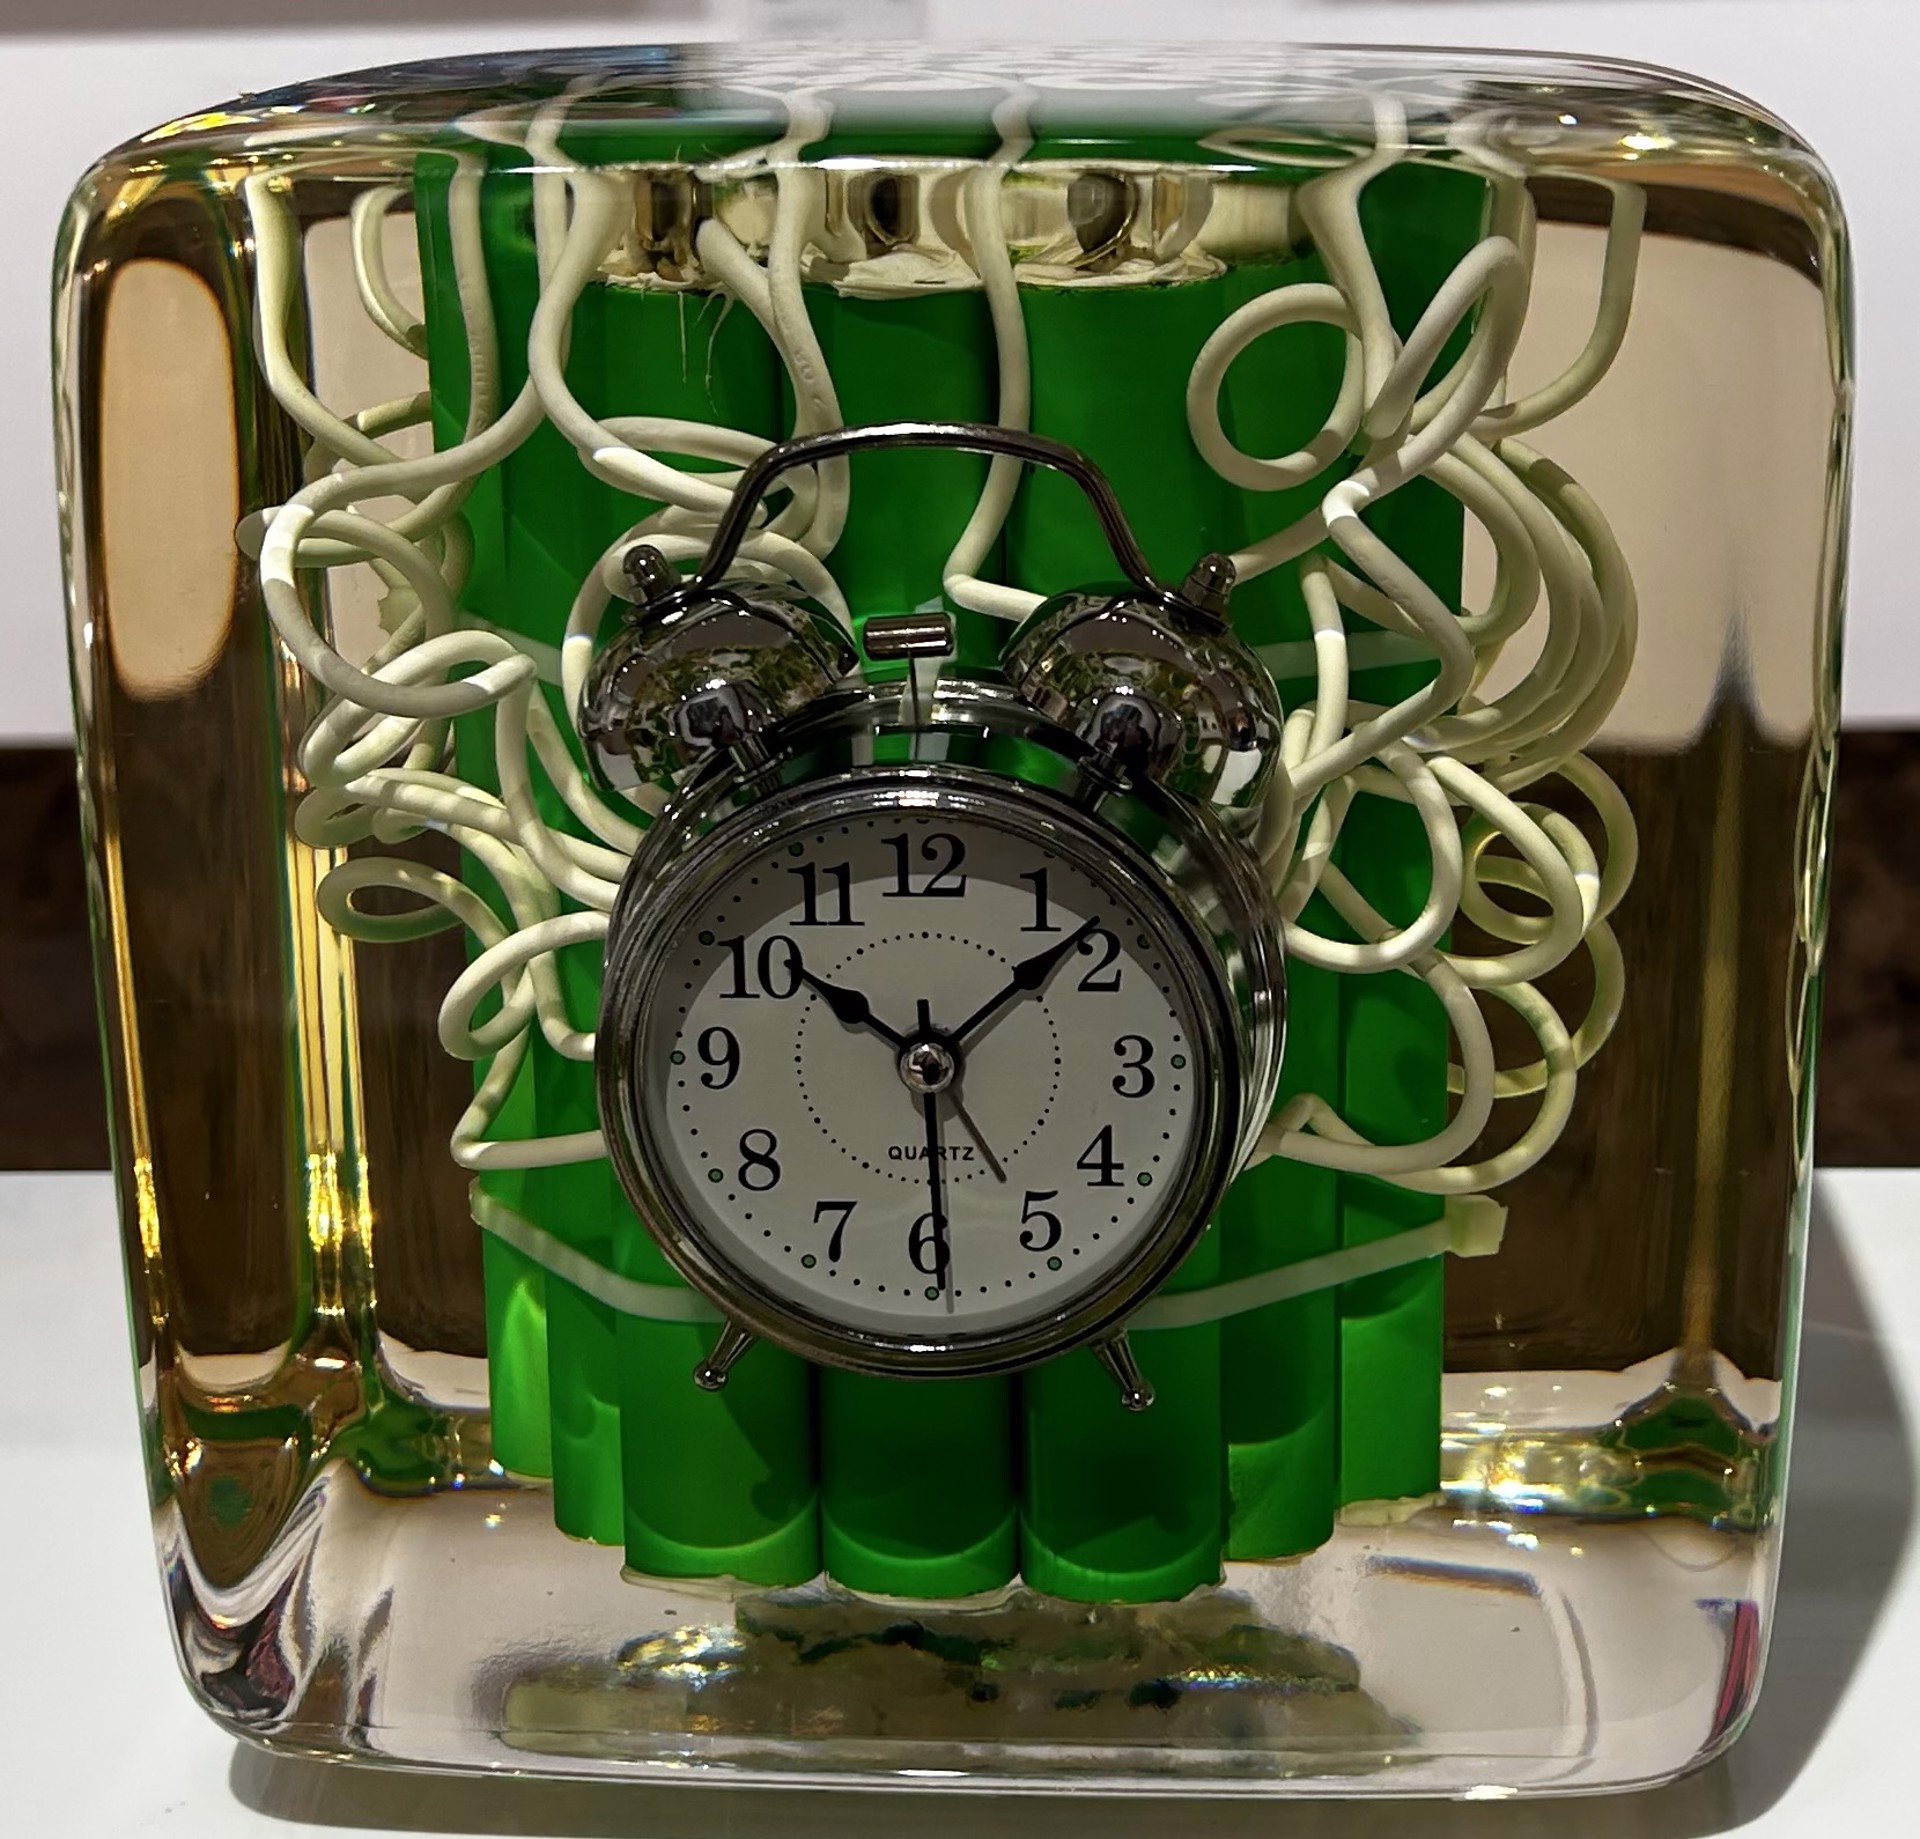 Time Bomb (Green) by Emmanuel Meneses